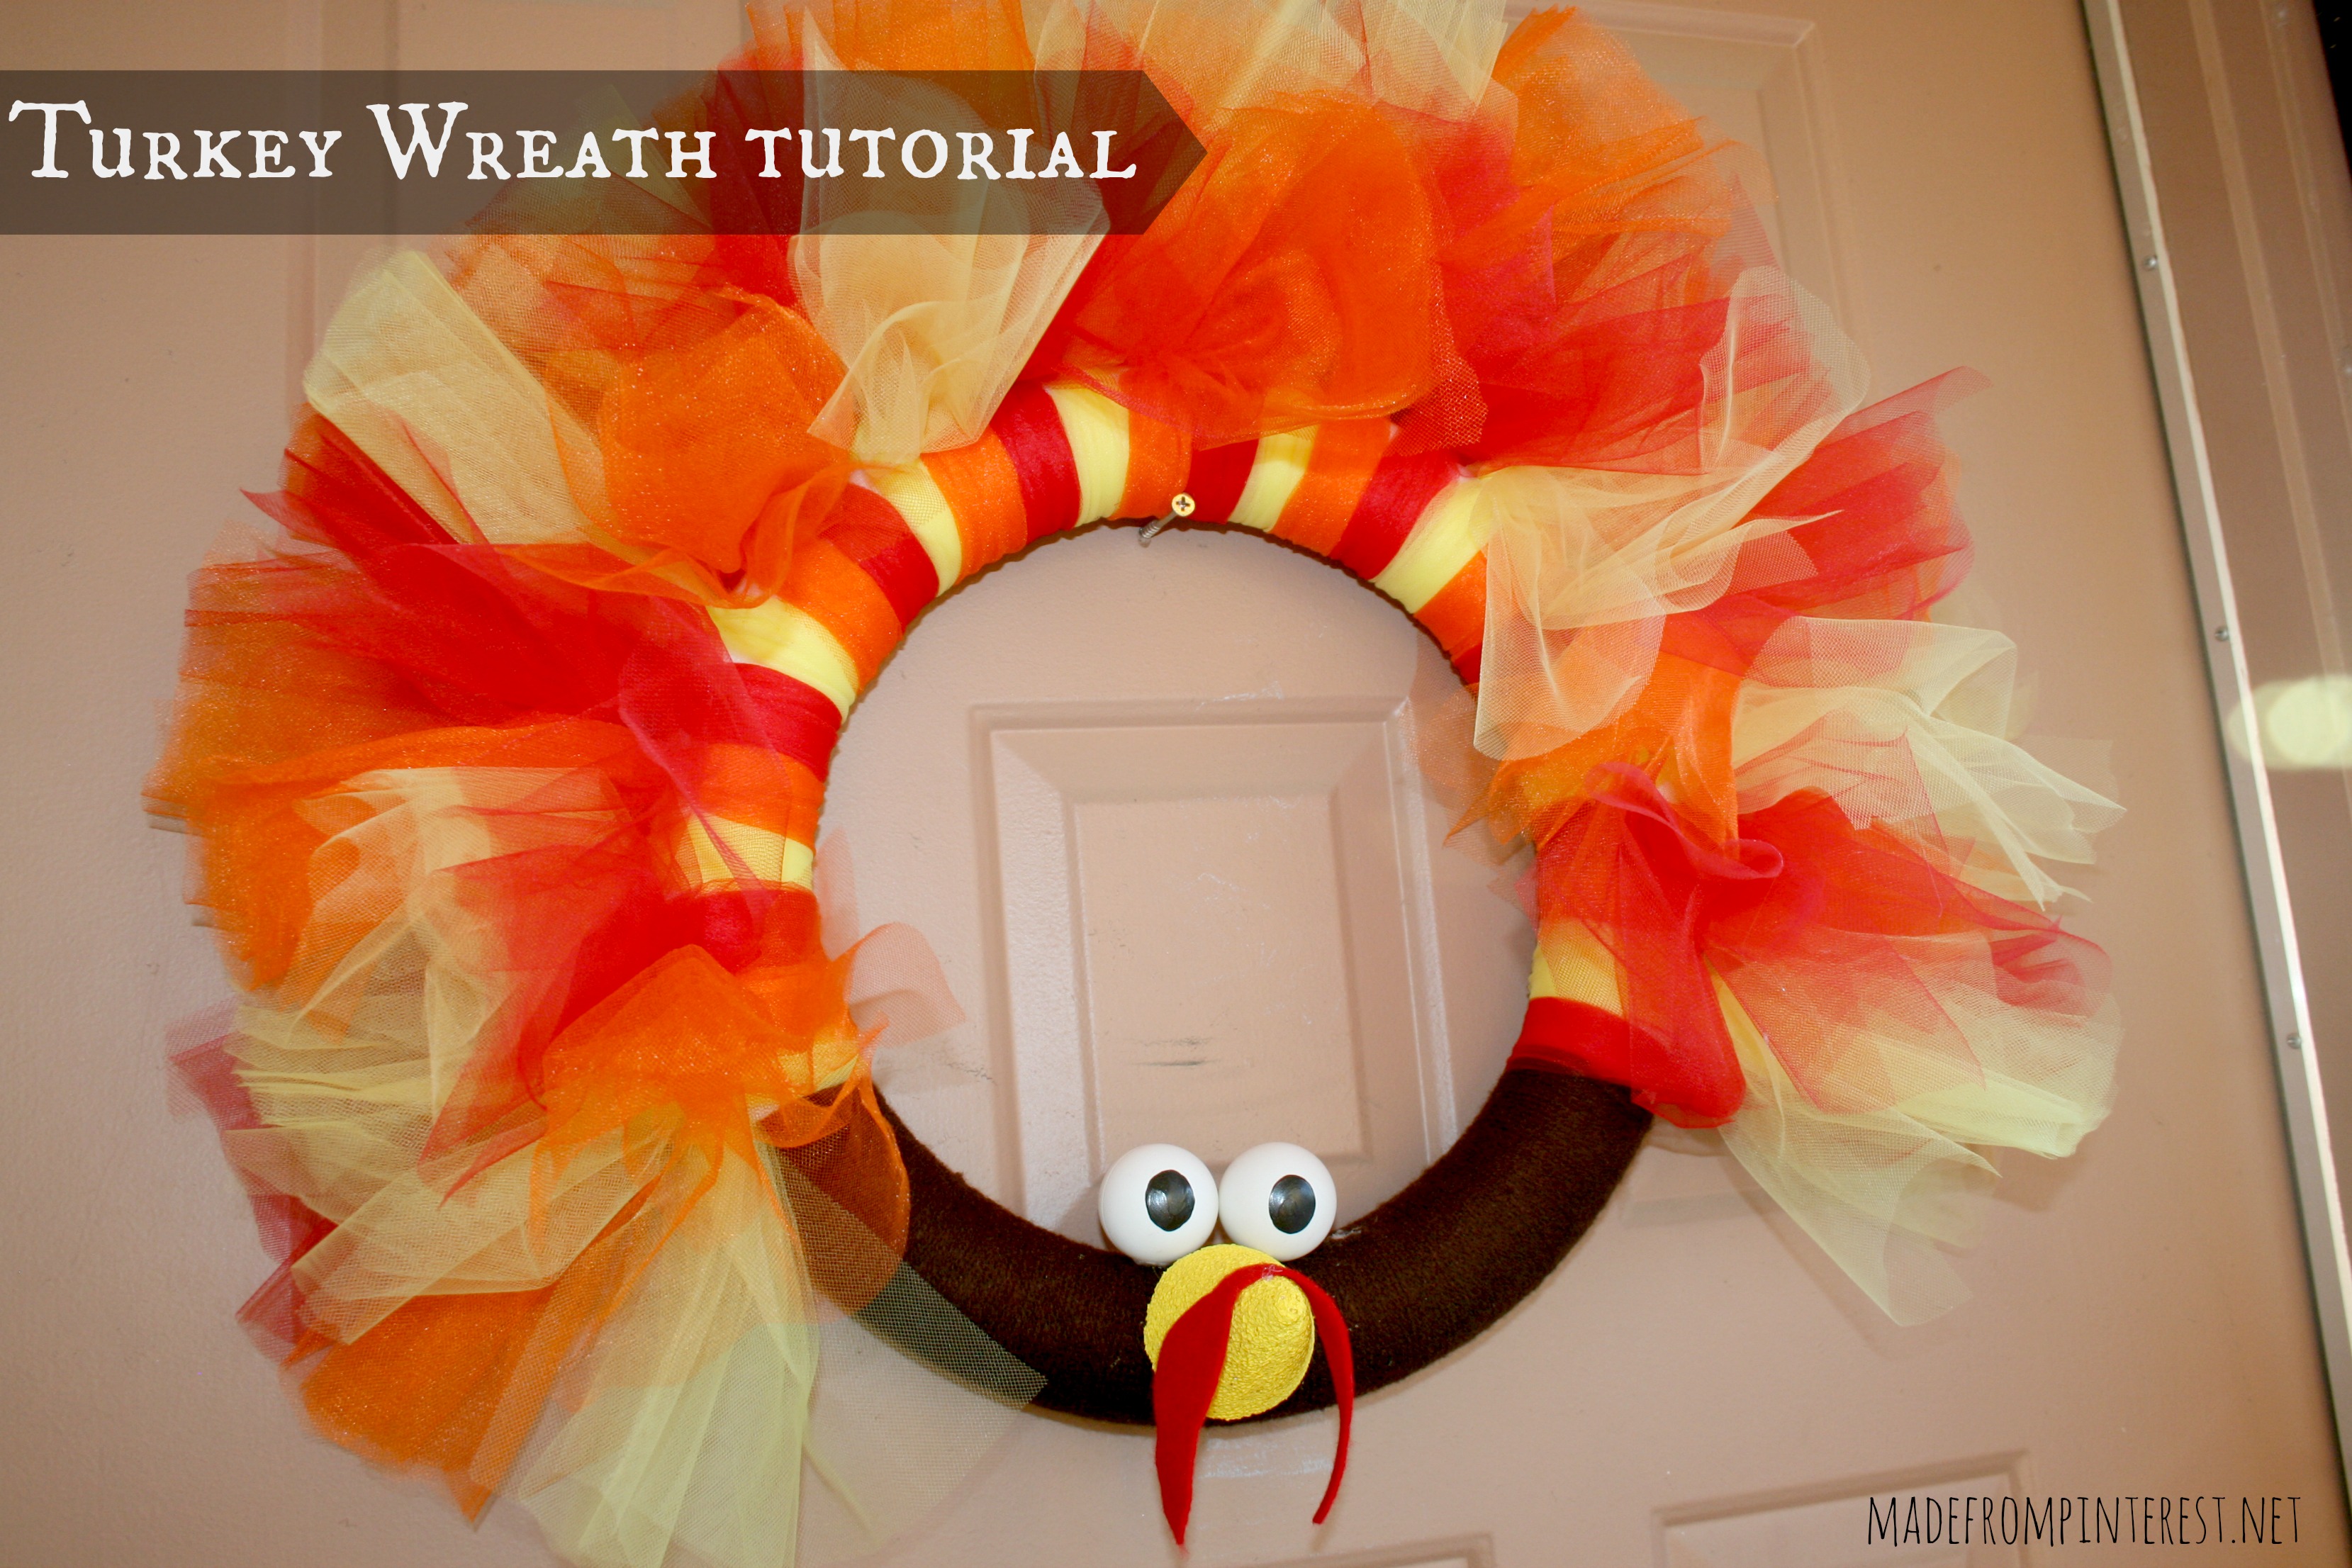 Look at this darling turkey wreath tutorial that I found at MadeFromPinterest.net!